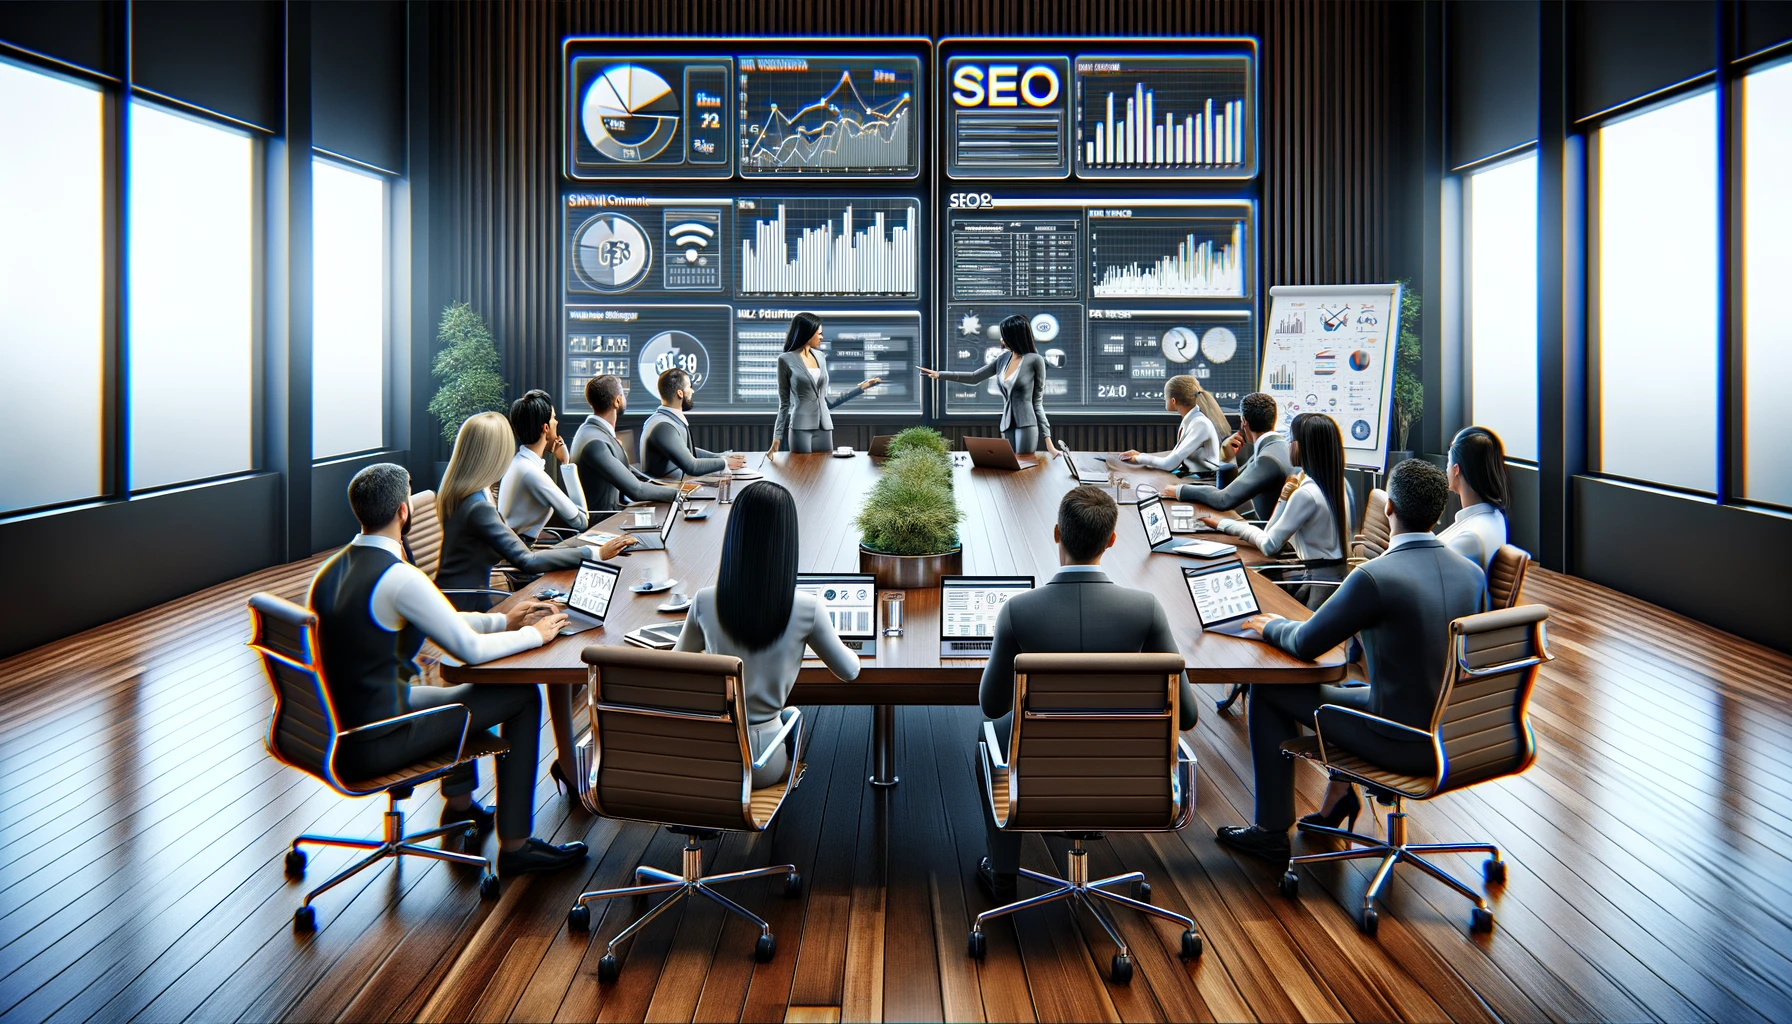 An image of an SEO goals meeting, depicting a professional team engaged in discussion around a conference table with various digital tools.